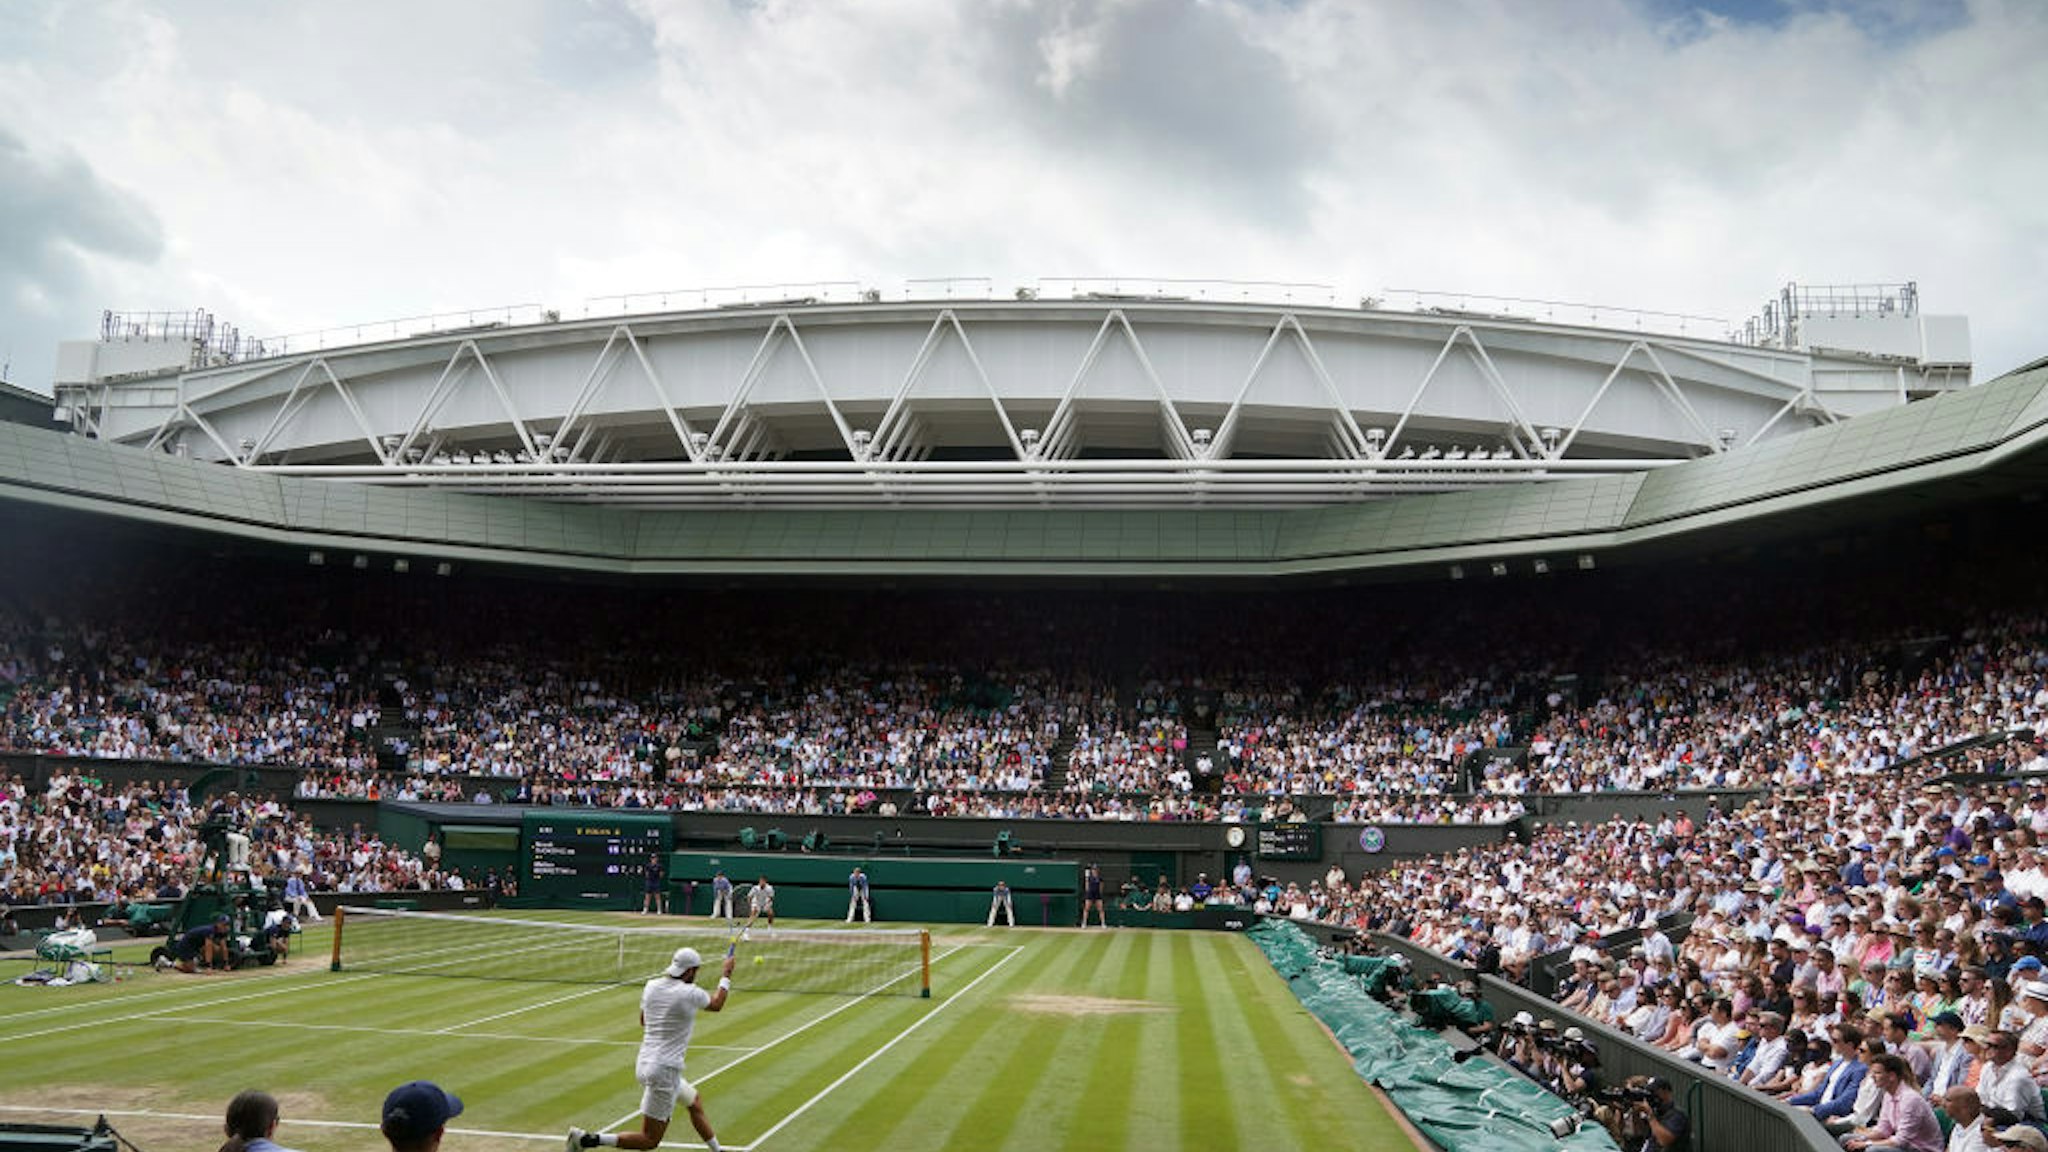 A general view of centre court with Novak Djokovic in action during the Gentlemen's Singles final against Matteo Berrettini (bottom court) on day thirteen of Wimbledon at The All England Lawn Tennis and Croquet Club, Wimbledon. Picture date: Sunday July 11, 2021. (Photo by Adam Davy/PA Images via Getty Images)